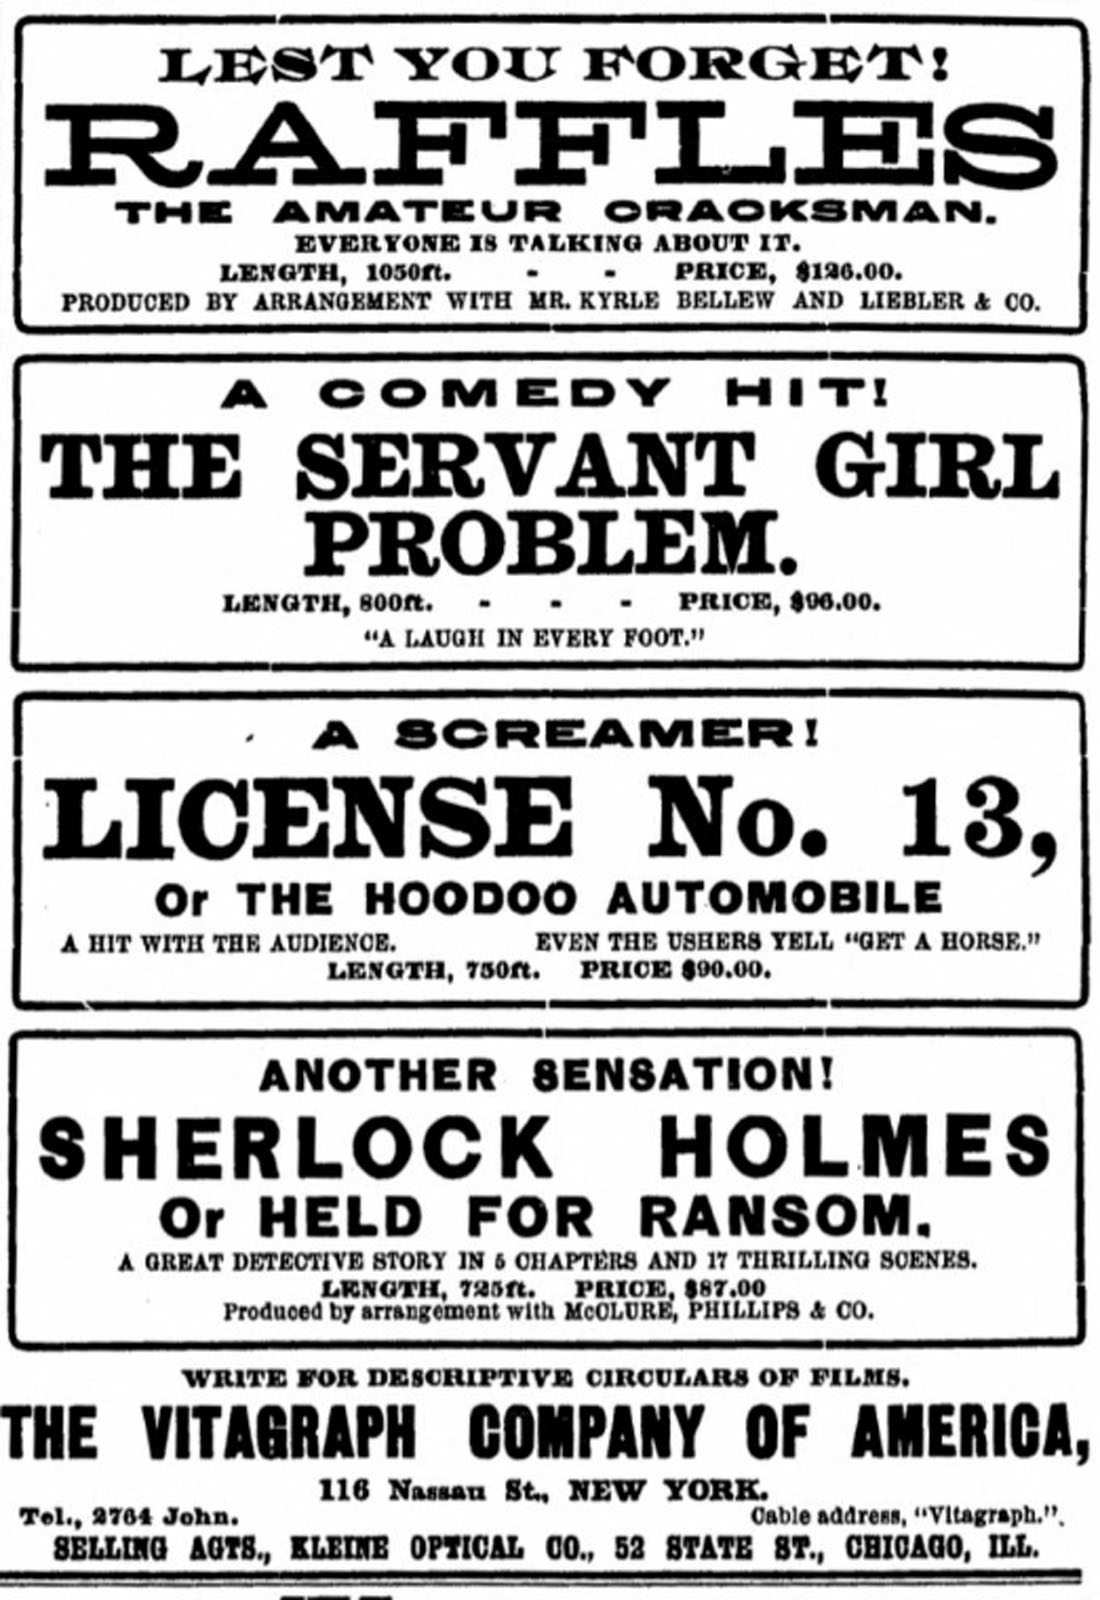 Adventures of Sherlock Holmes or Held for a Ransom